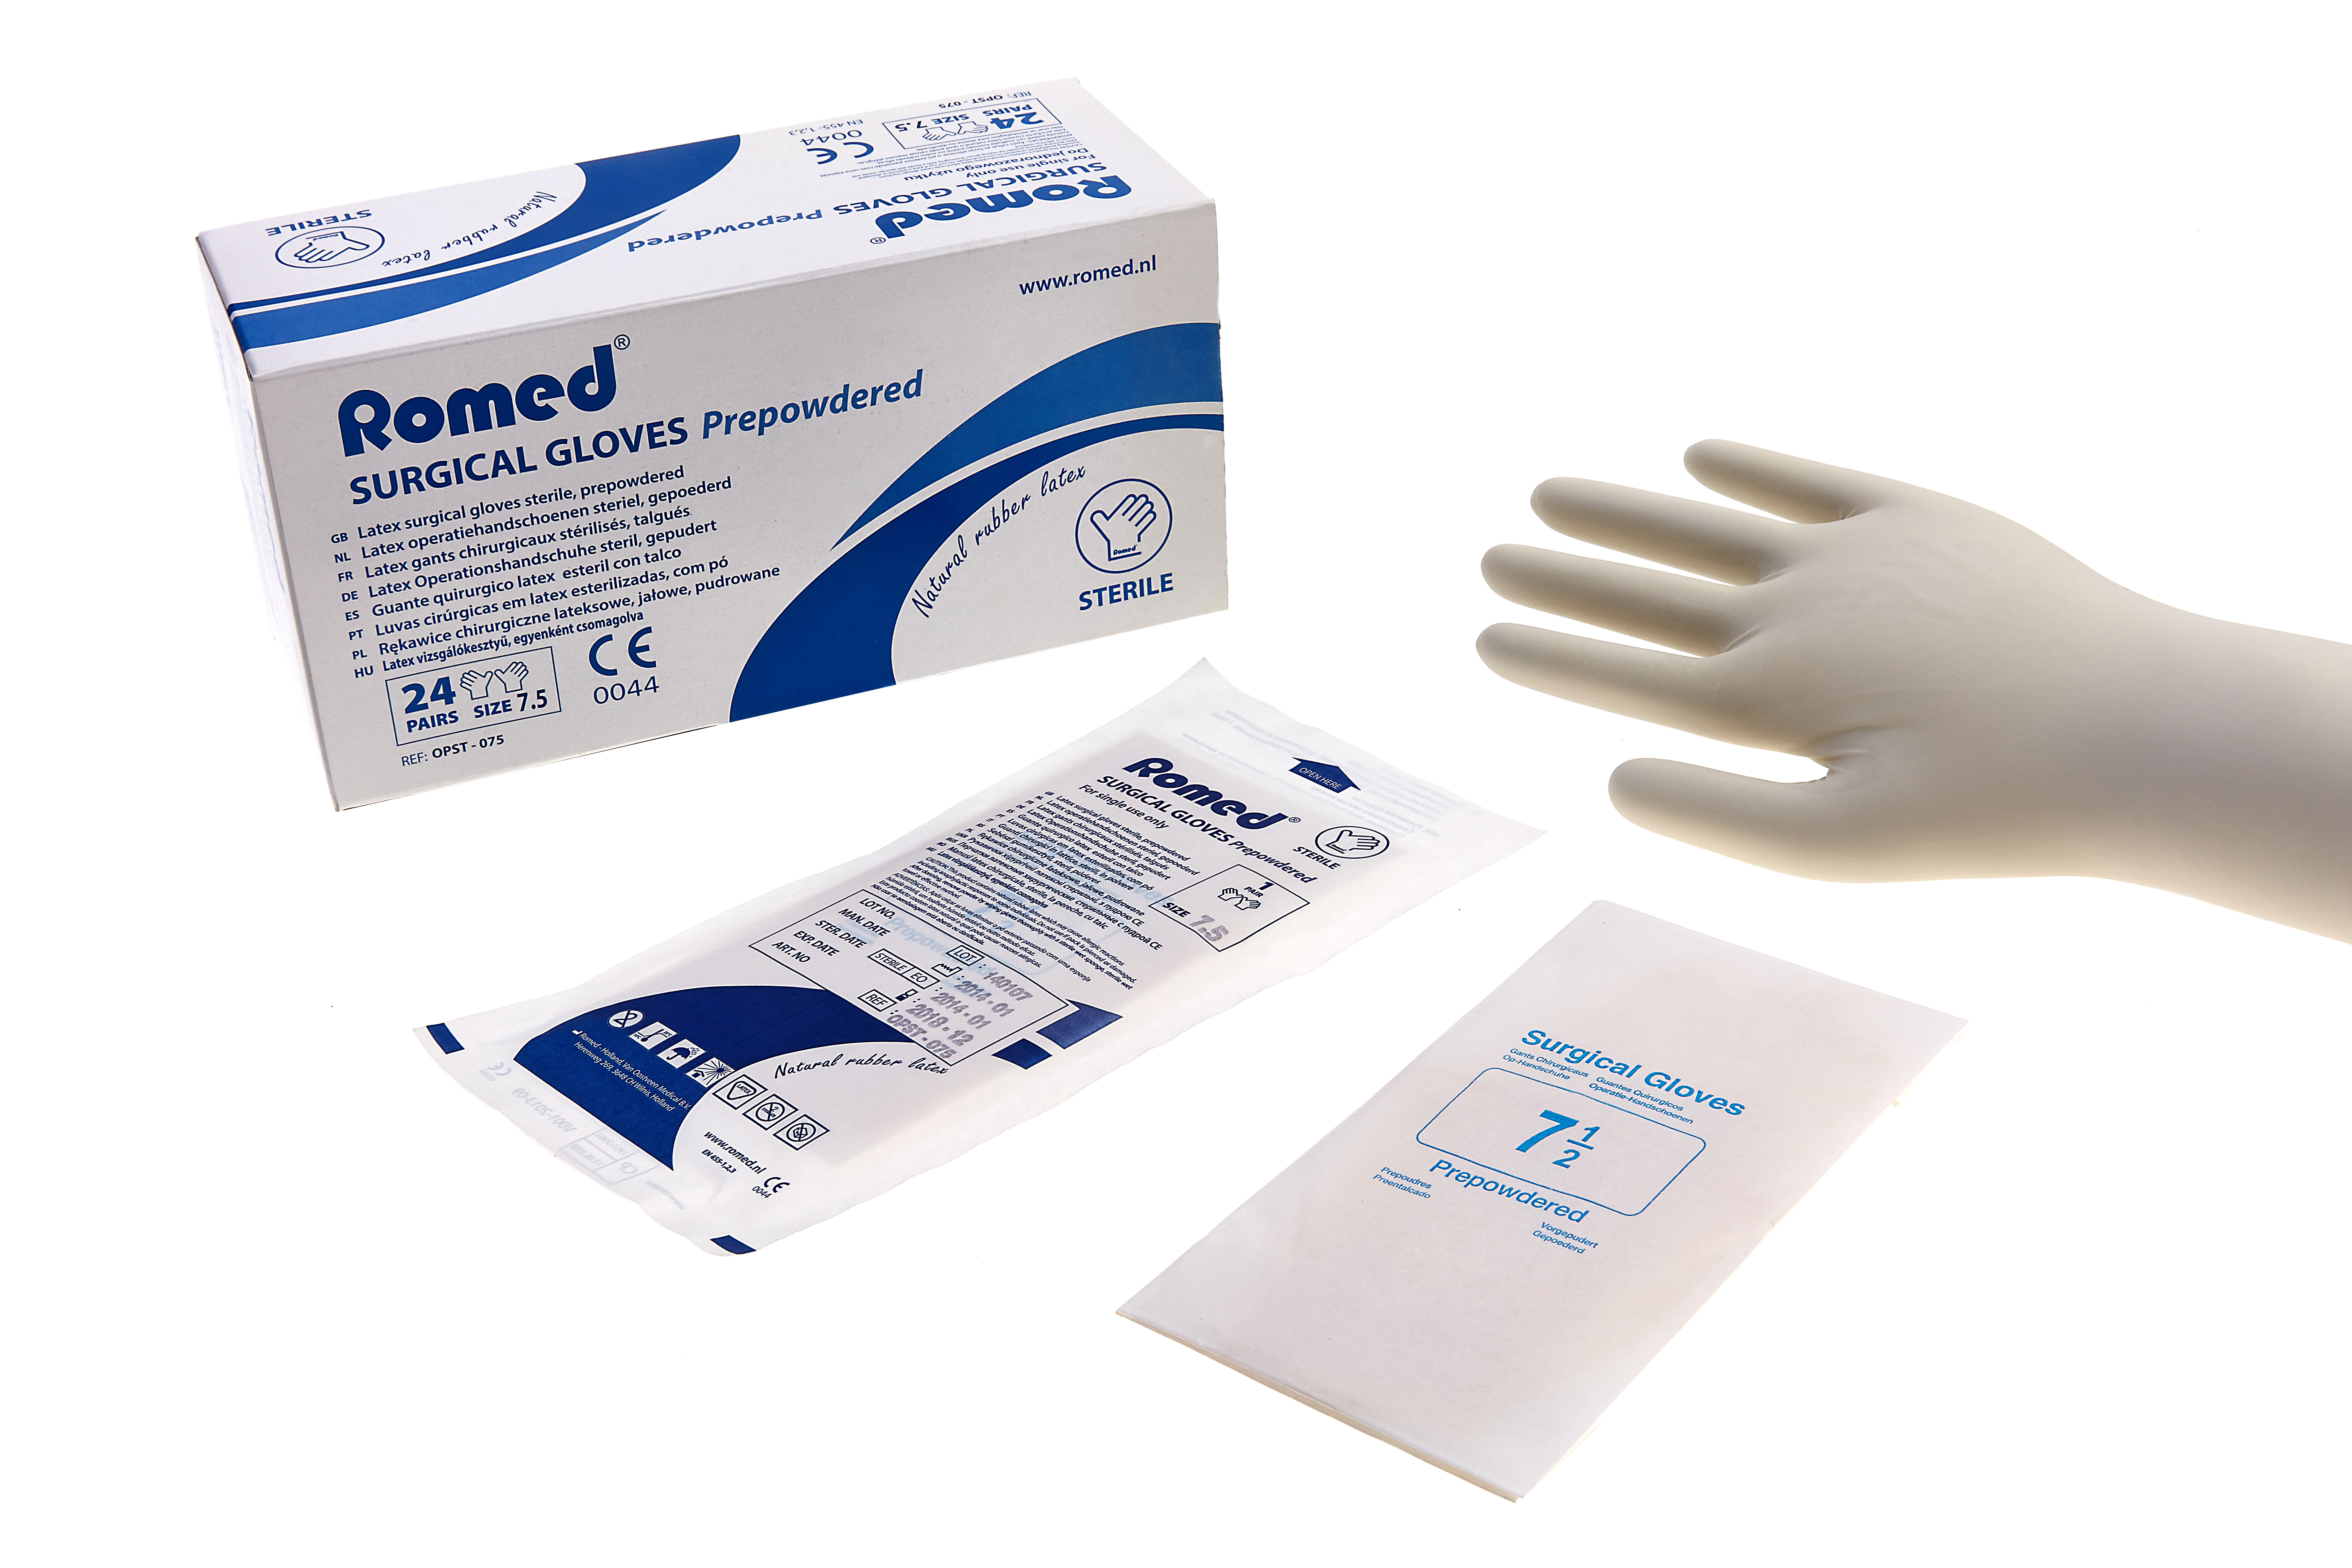 OPST060 Romed latex surgical gloves, prepowdered, size 6, sterile per pair, 50 pairs in an inner box, 8 x 50 pairs = 400 pairs in a carton.